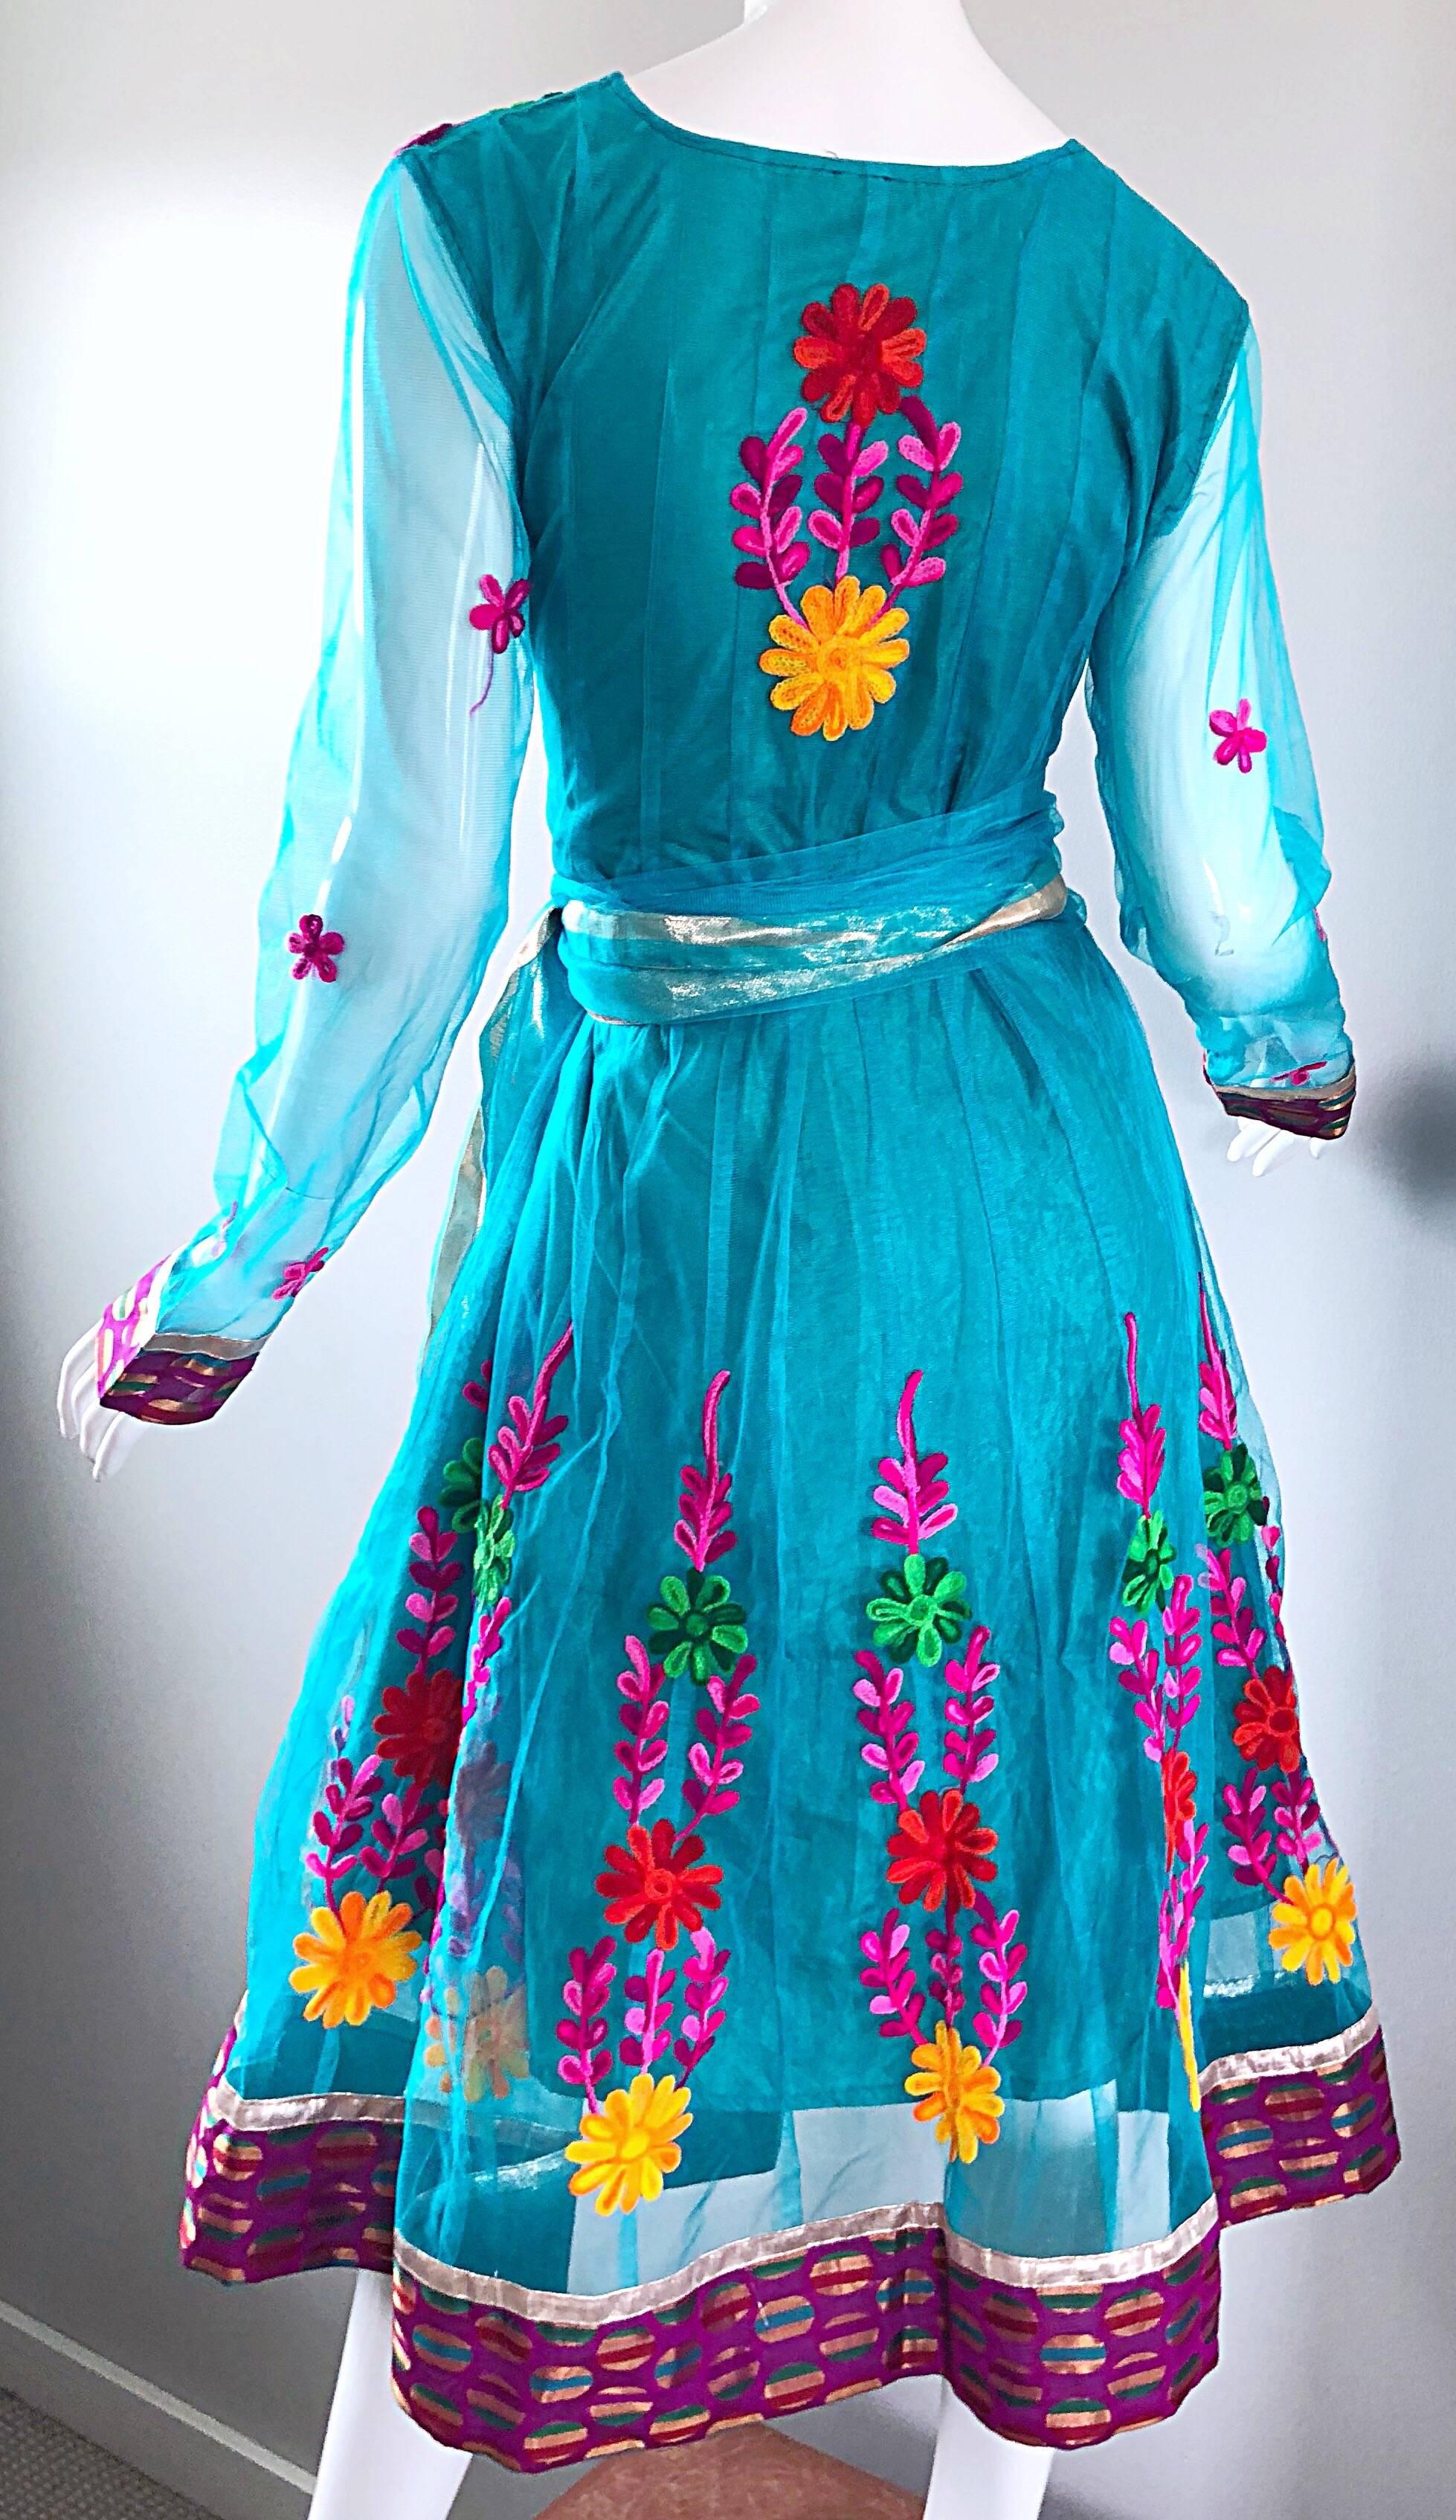 Women's Gorgeous 1970s Turquoise Blue Embroidered Vintage Indian Kurta 70s Dress + Sash For Sale